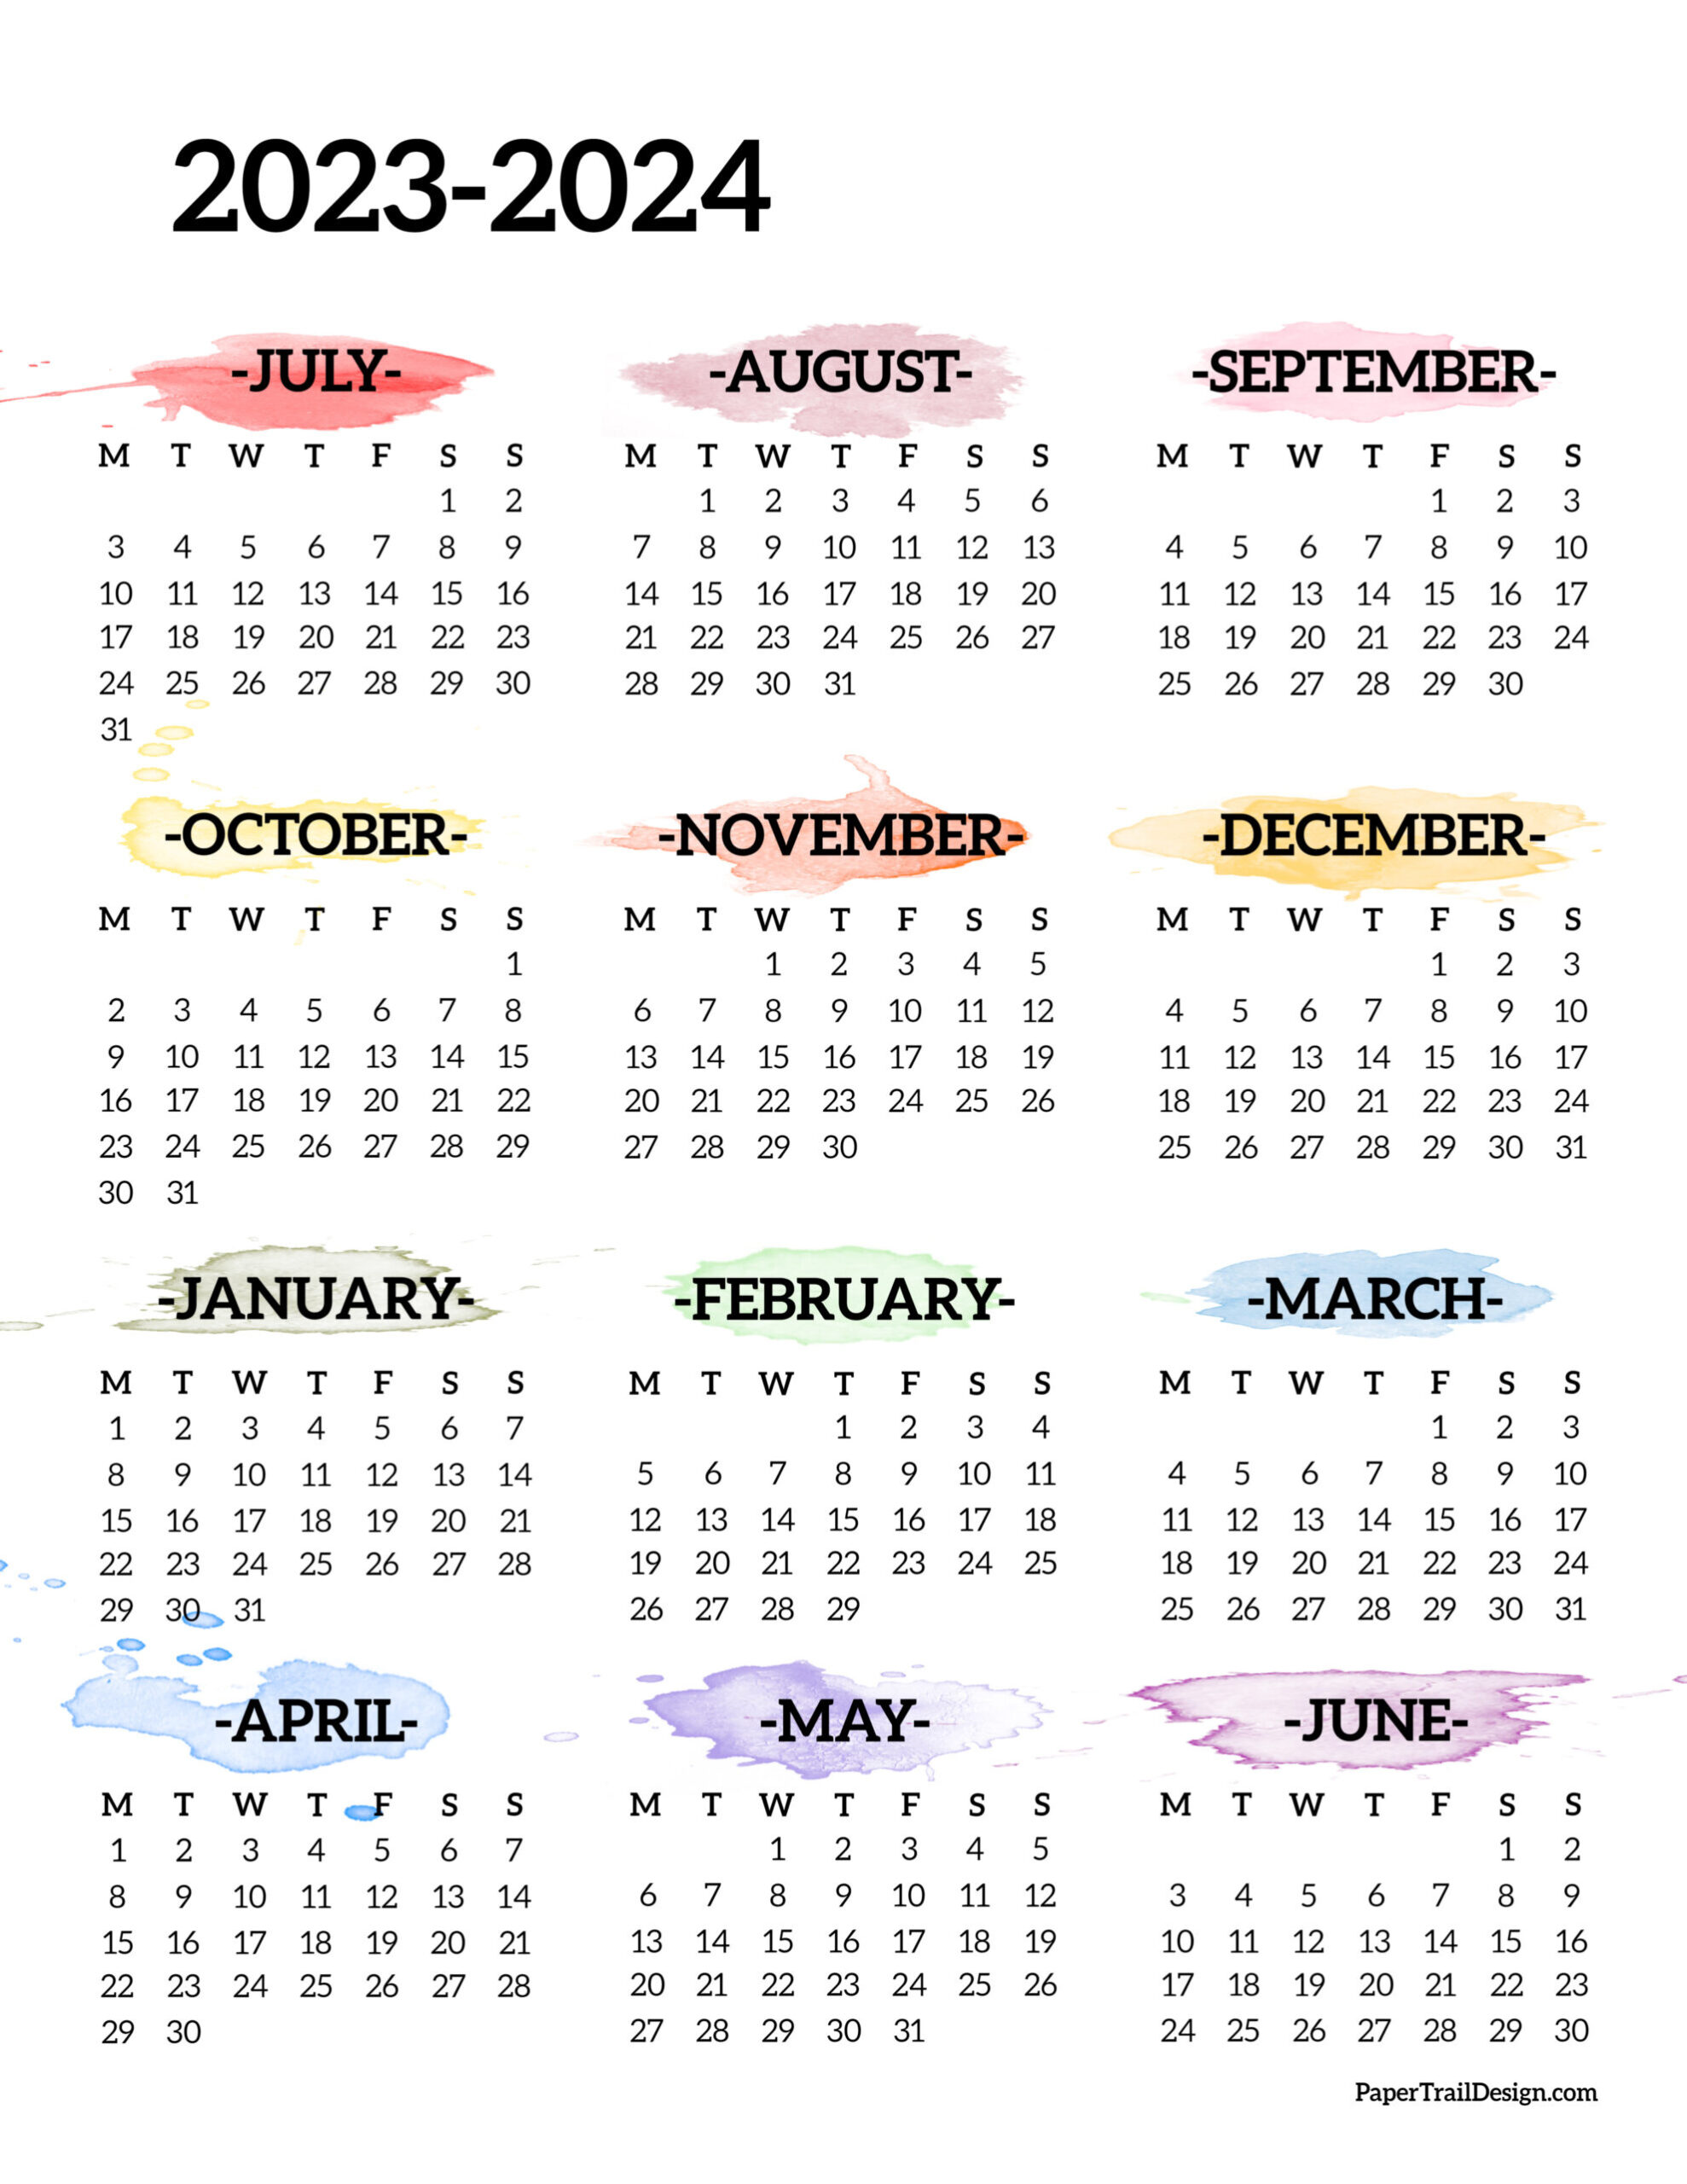 2023-2024 School Year Calendar Free Printable - Paper Trail Design with July 2023 To May 2024 Calendar